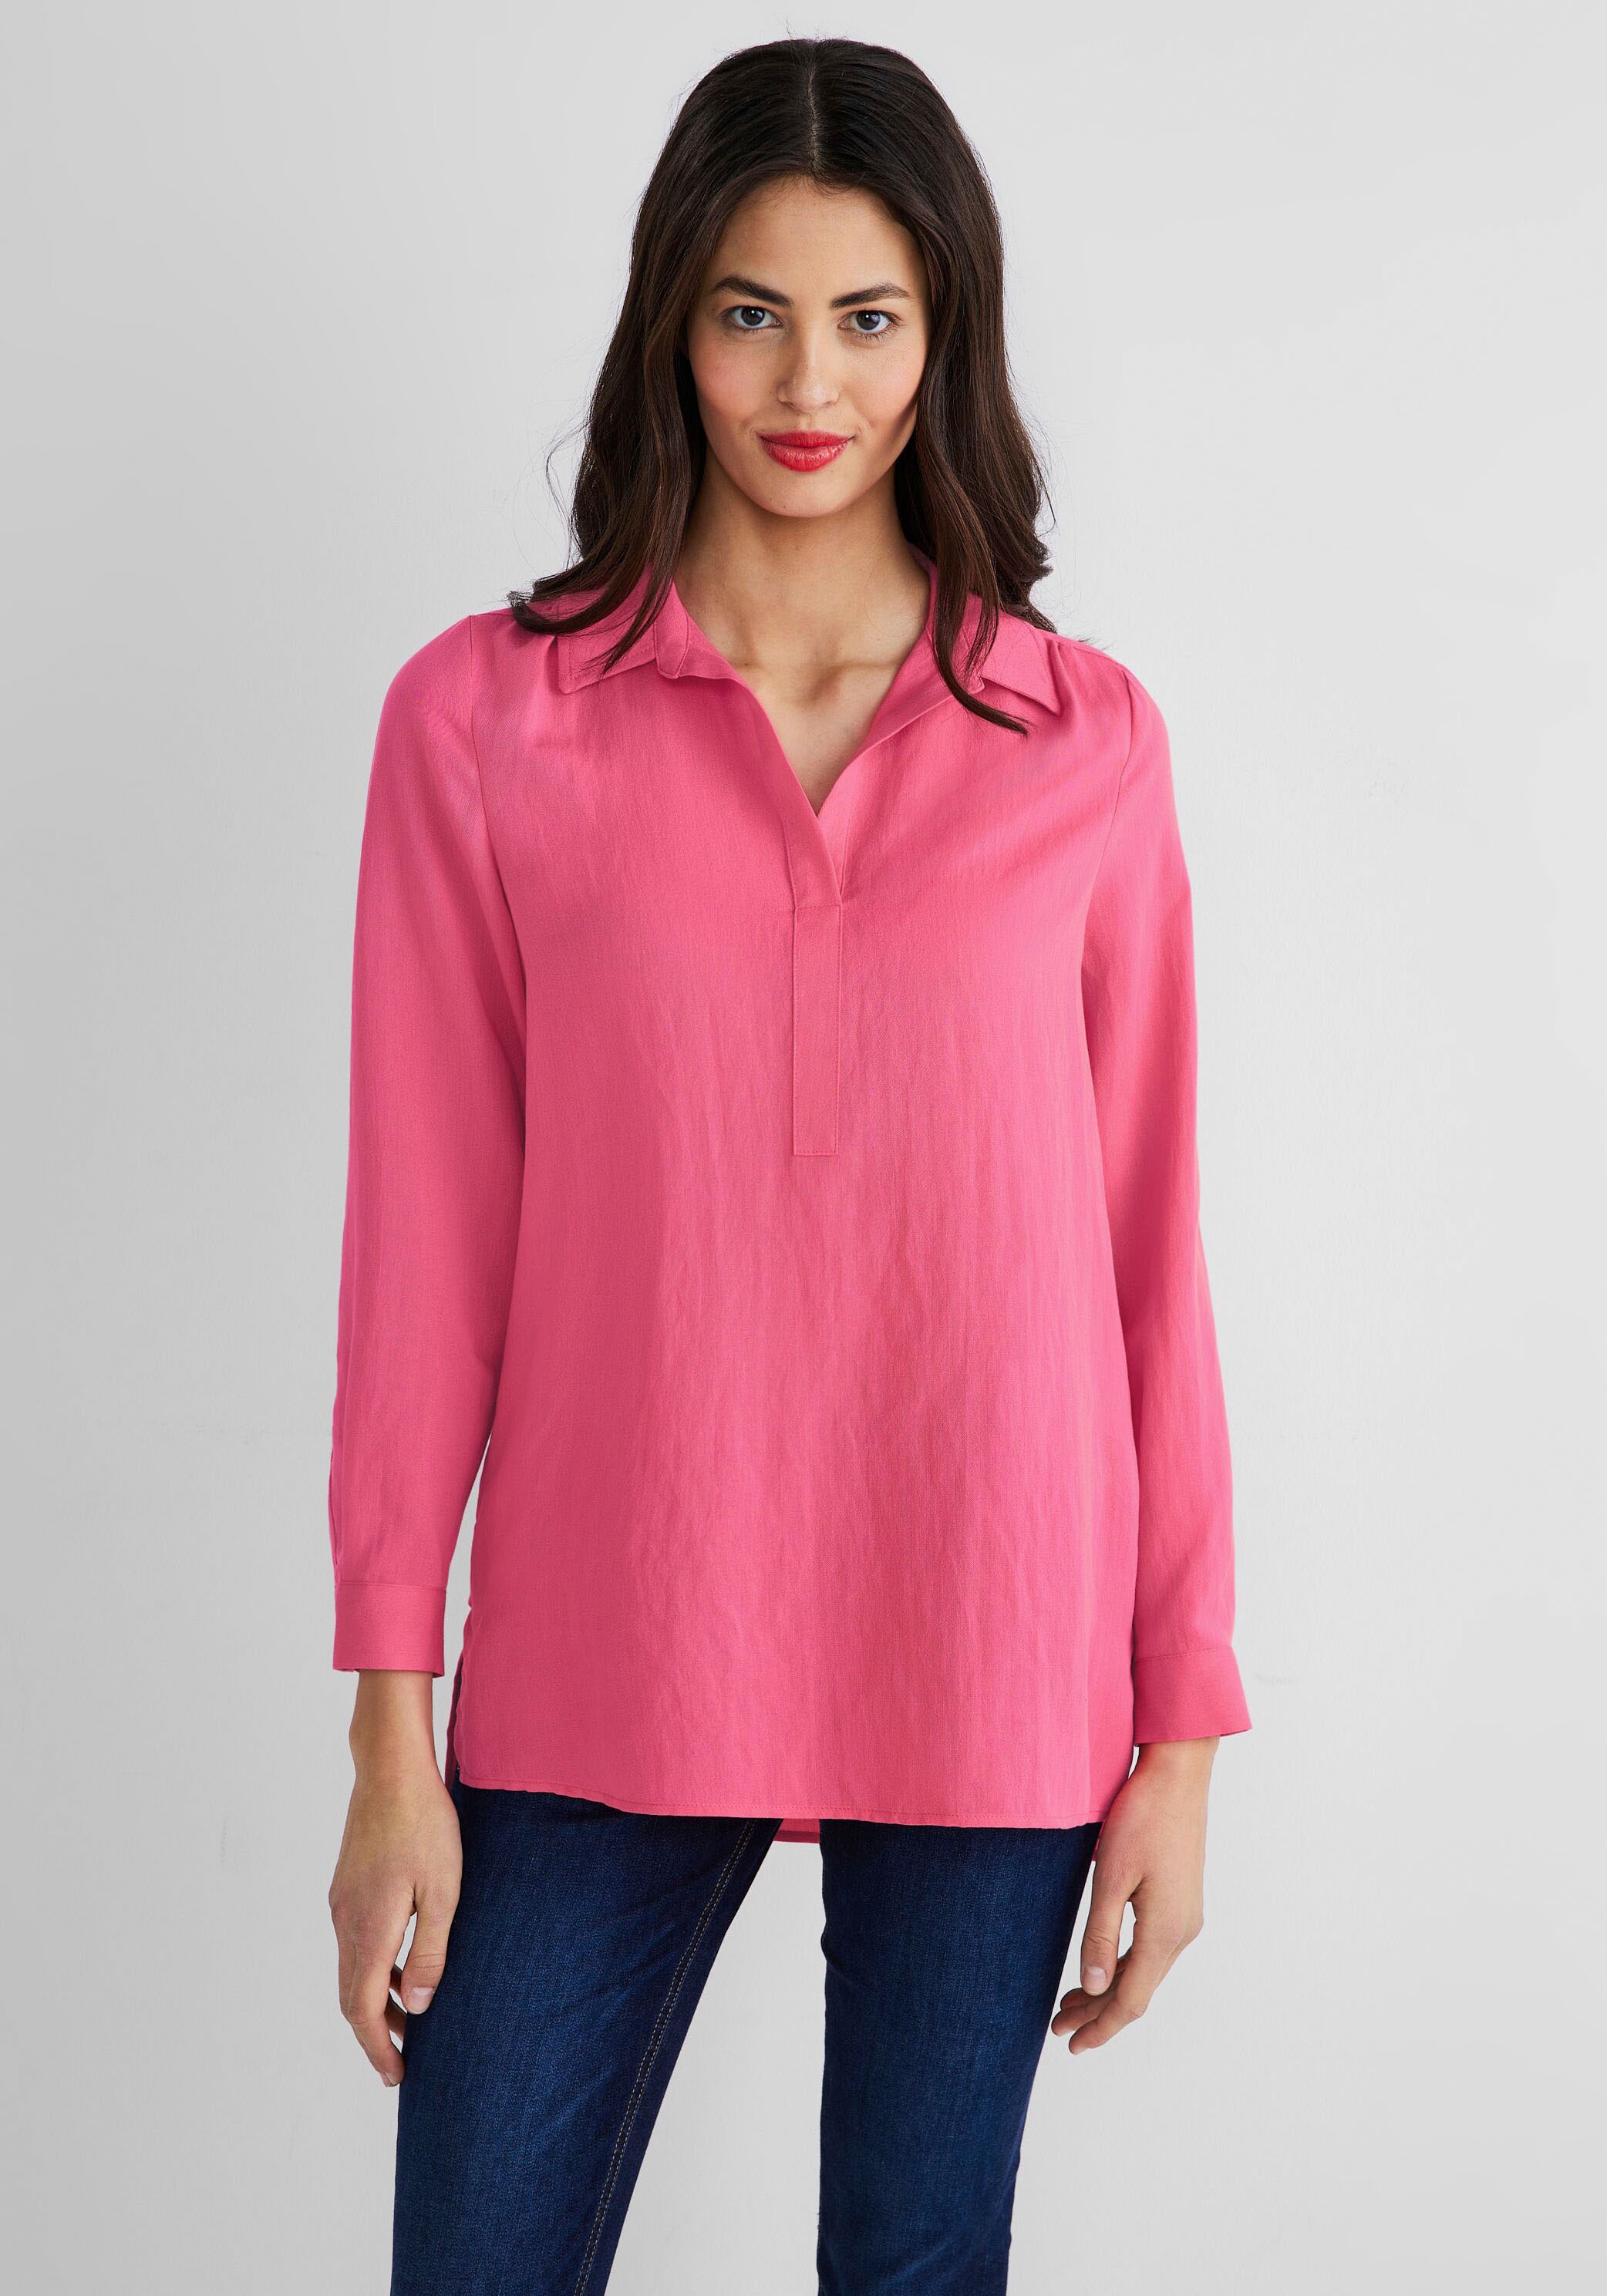 ♕ STREET bei ONE Longbluse, Silhouette in vorteilhafter